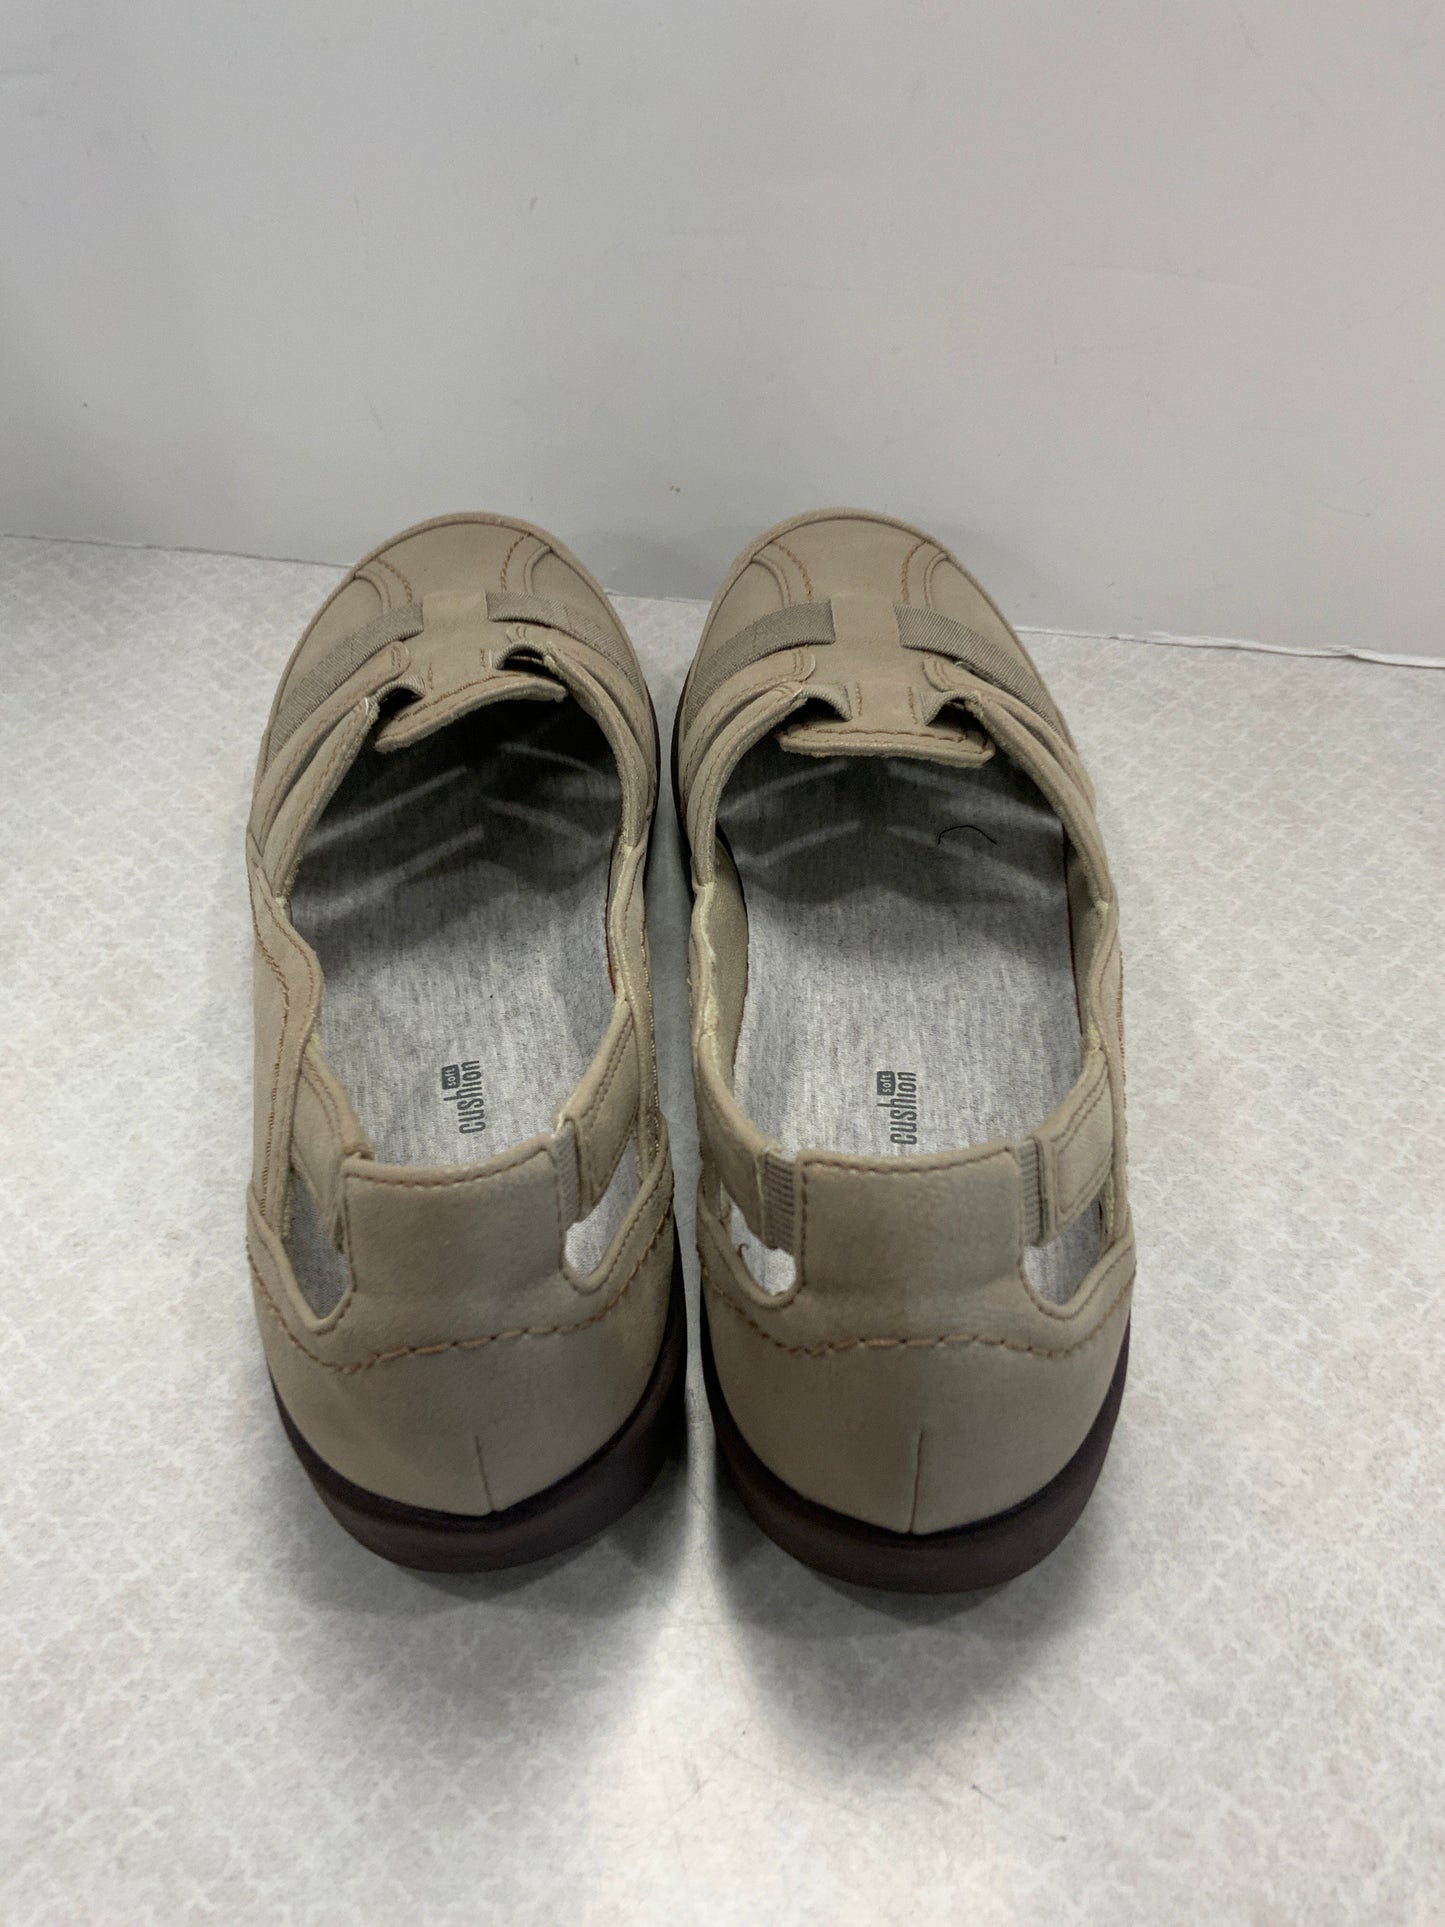 Brown Shoes Flats Clarks, Size 9.5